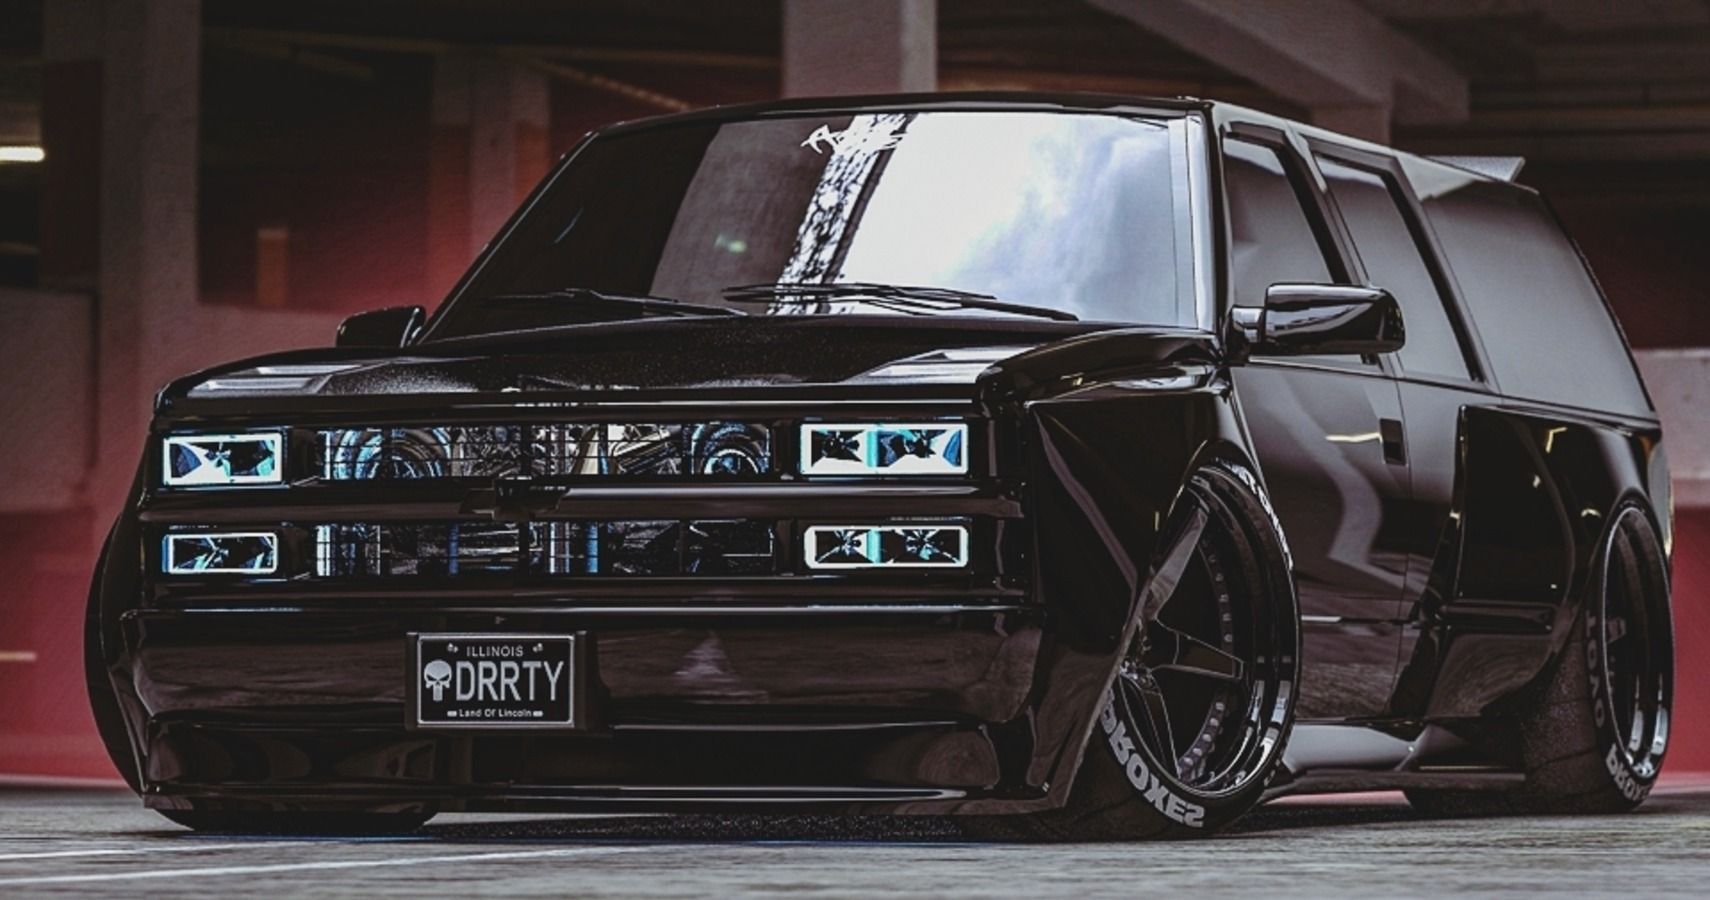 LS-Swapped Chevy Tahoe Widebody Rides Dirty